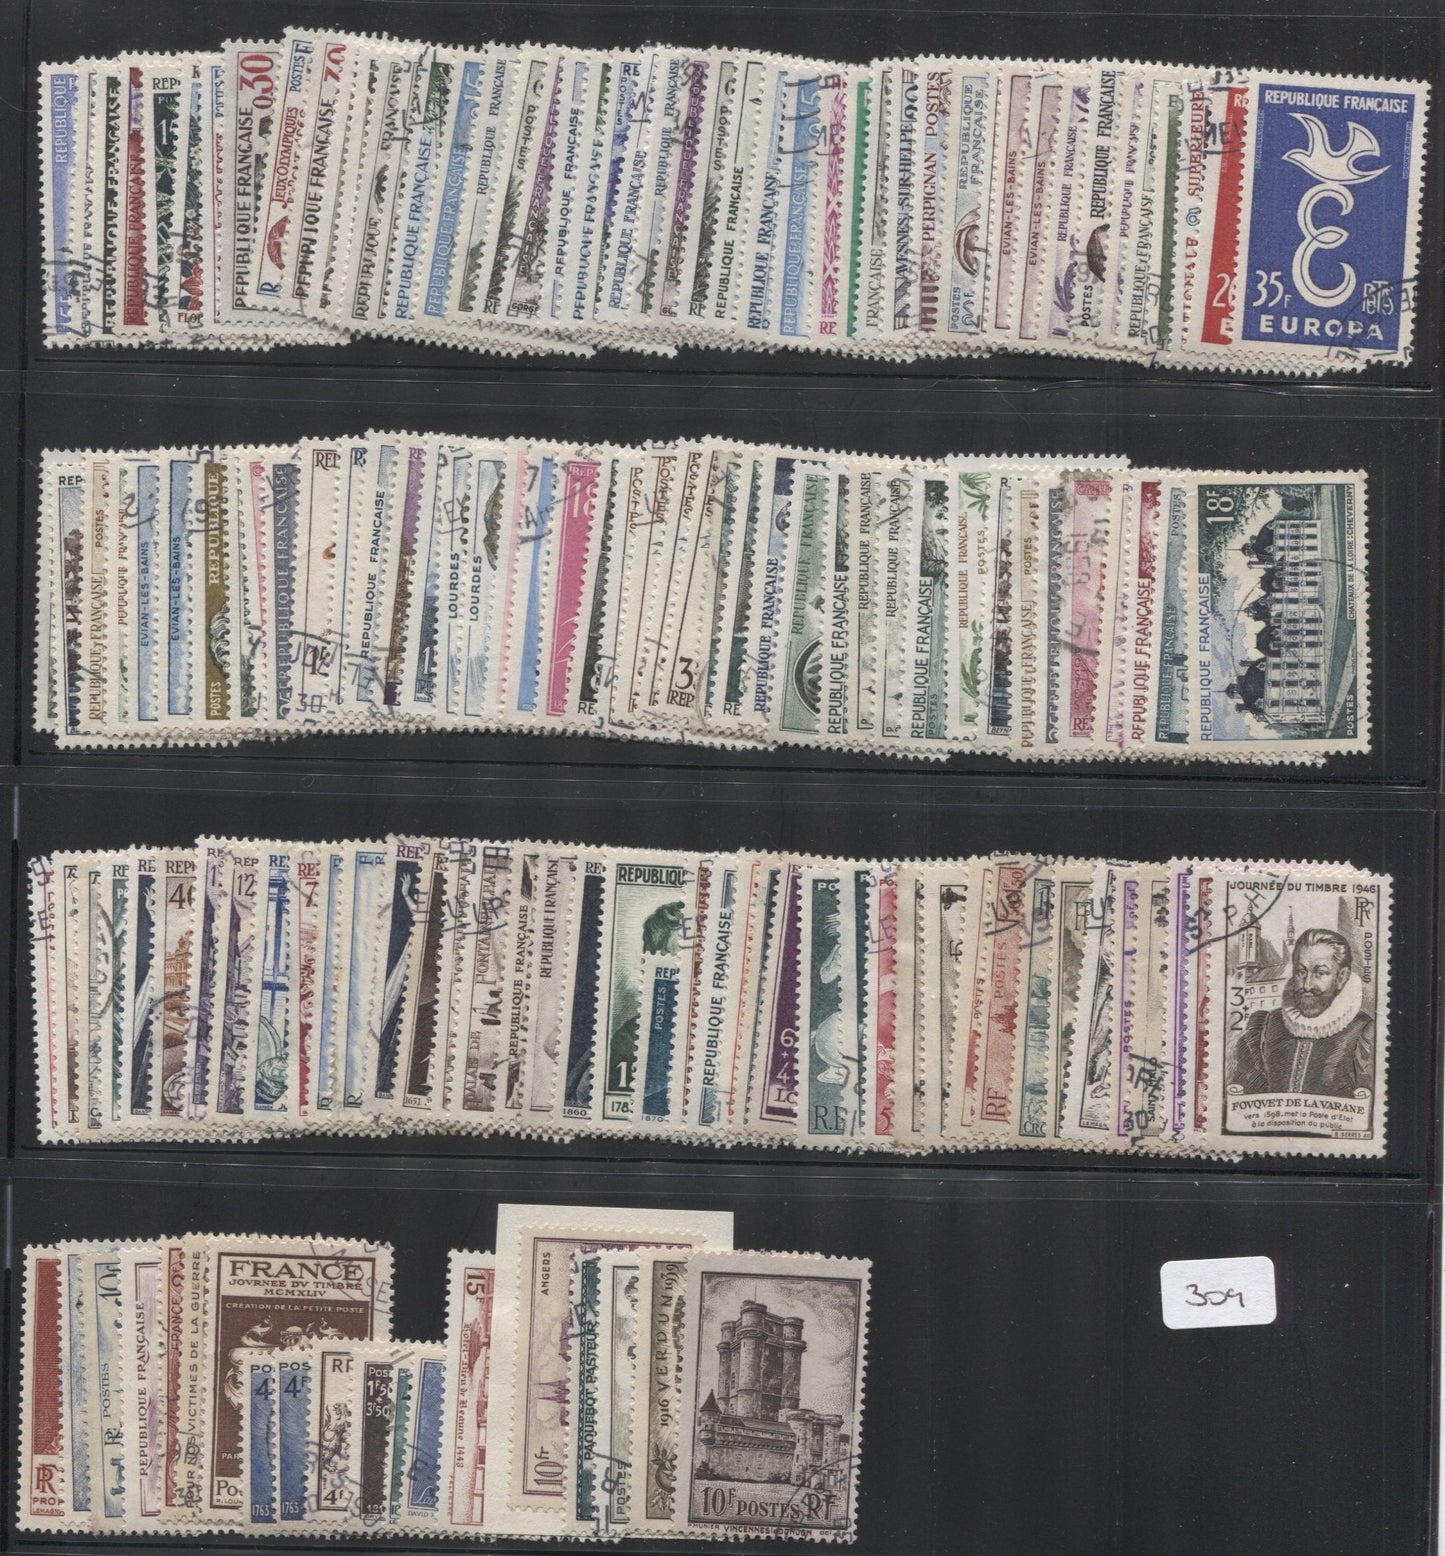 Lot 309 France 1930s-1960s Commemoratives, Definitives, Semipostals & Airmails, A VF Used Range Of 148 Singles, Estimated 2017 Scott Cat. $40 USD, Click on Listing to See ALL Pictures